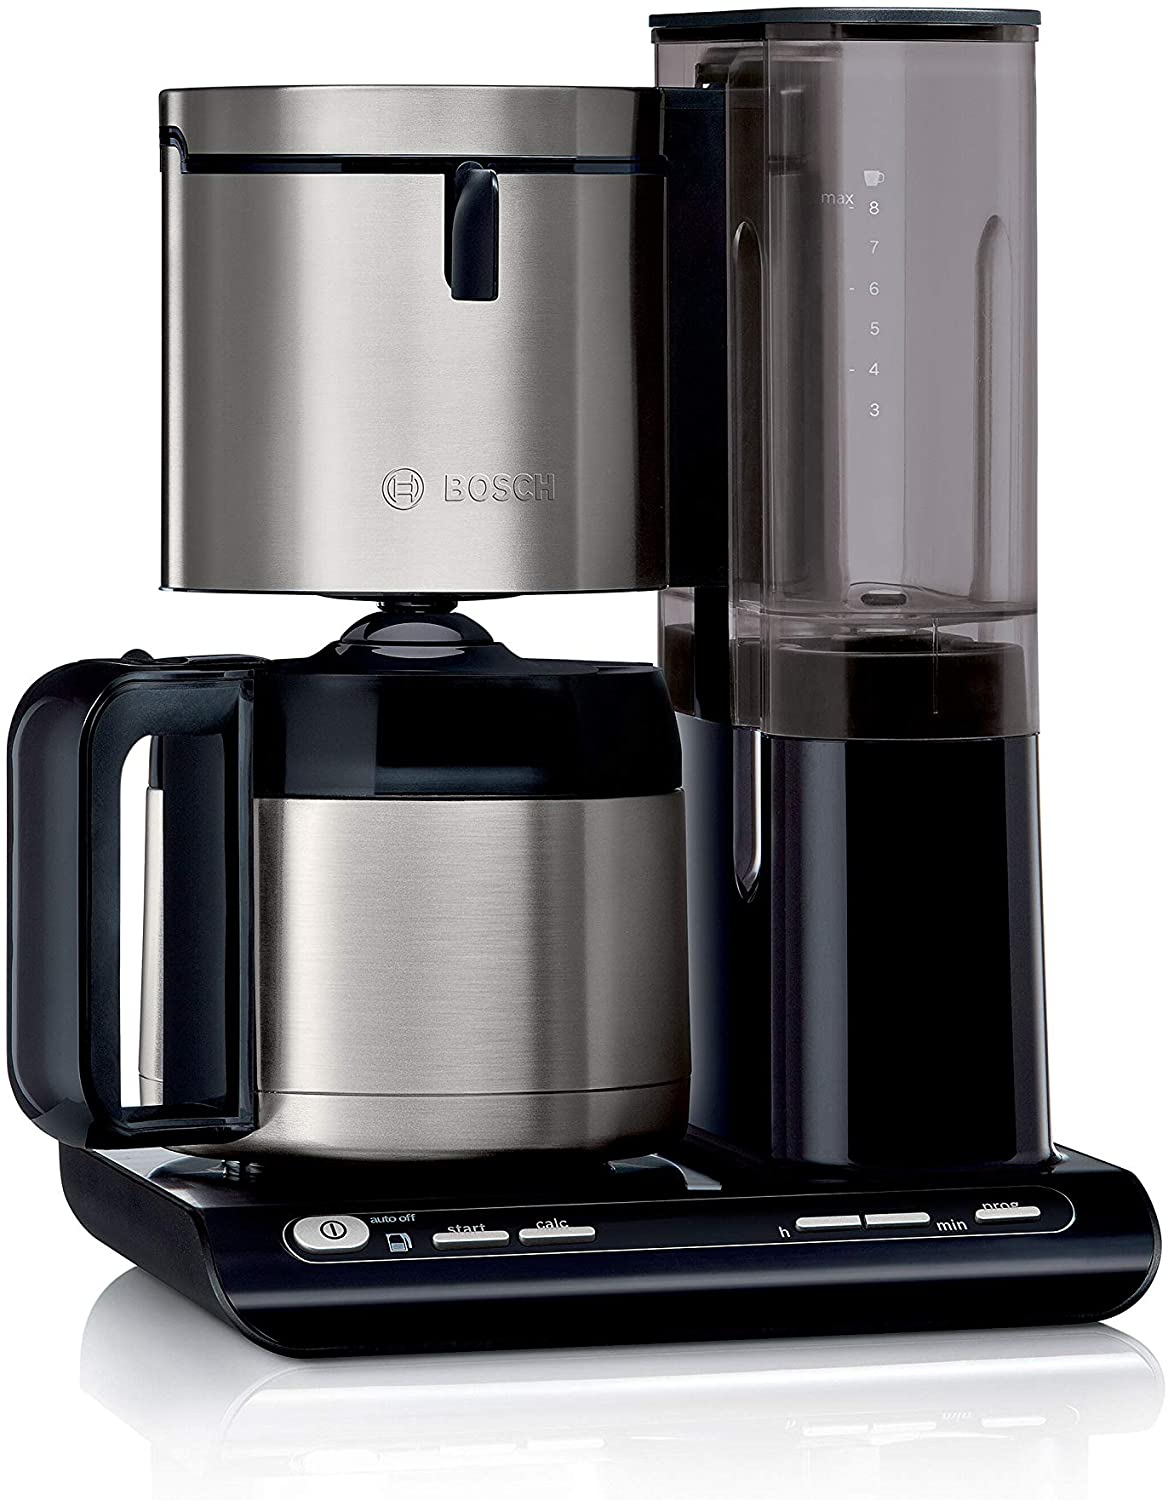 Bosch Hausgerate Bosch Styline TKA8A683 Filter Coffee Machine, Aroma Sensor, Stainless Steel Thermal Jug 1.1 L, for 8-12 Cups, Automatic Shut-Off, Descaling System, Drip Stop, Removable Water Tank (1 L), 1100 W, Black